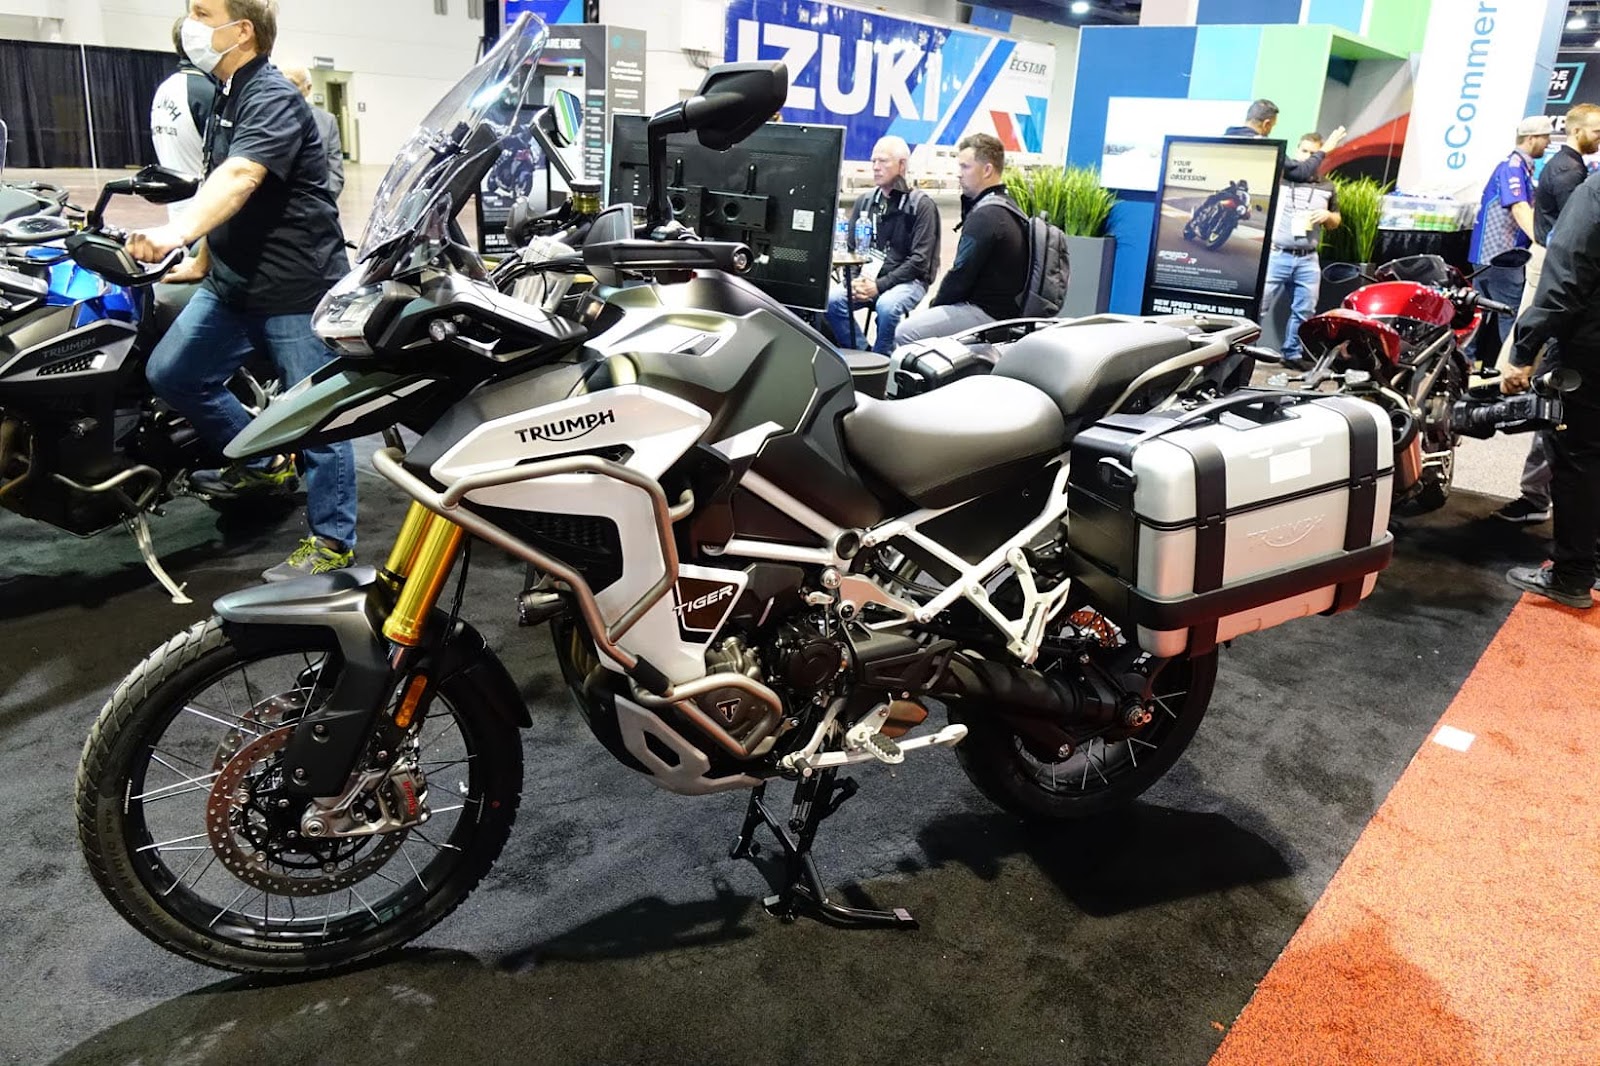 Triumph motorcycle showcased at AIM Expo, premier event for motorcycle enthusiasts